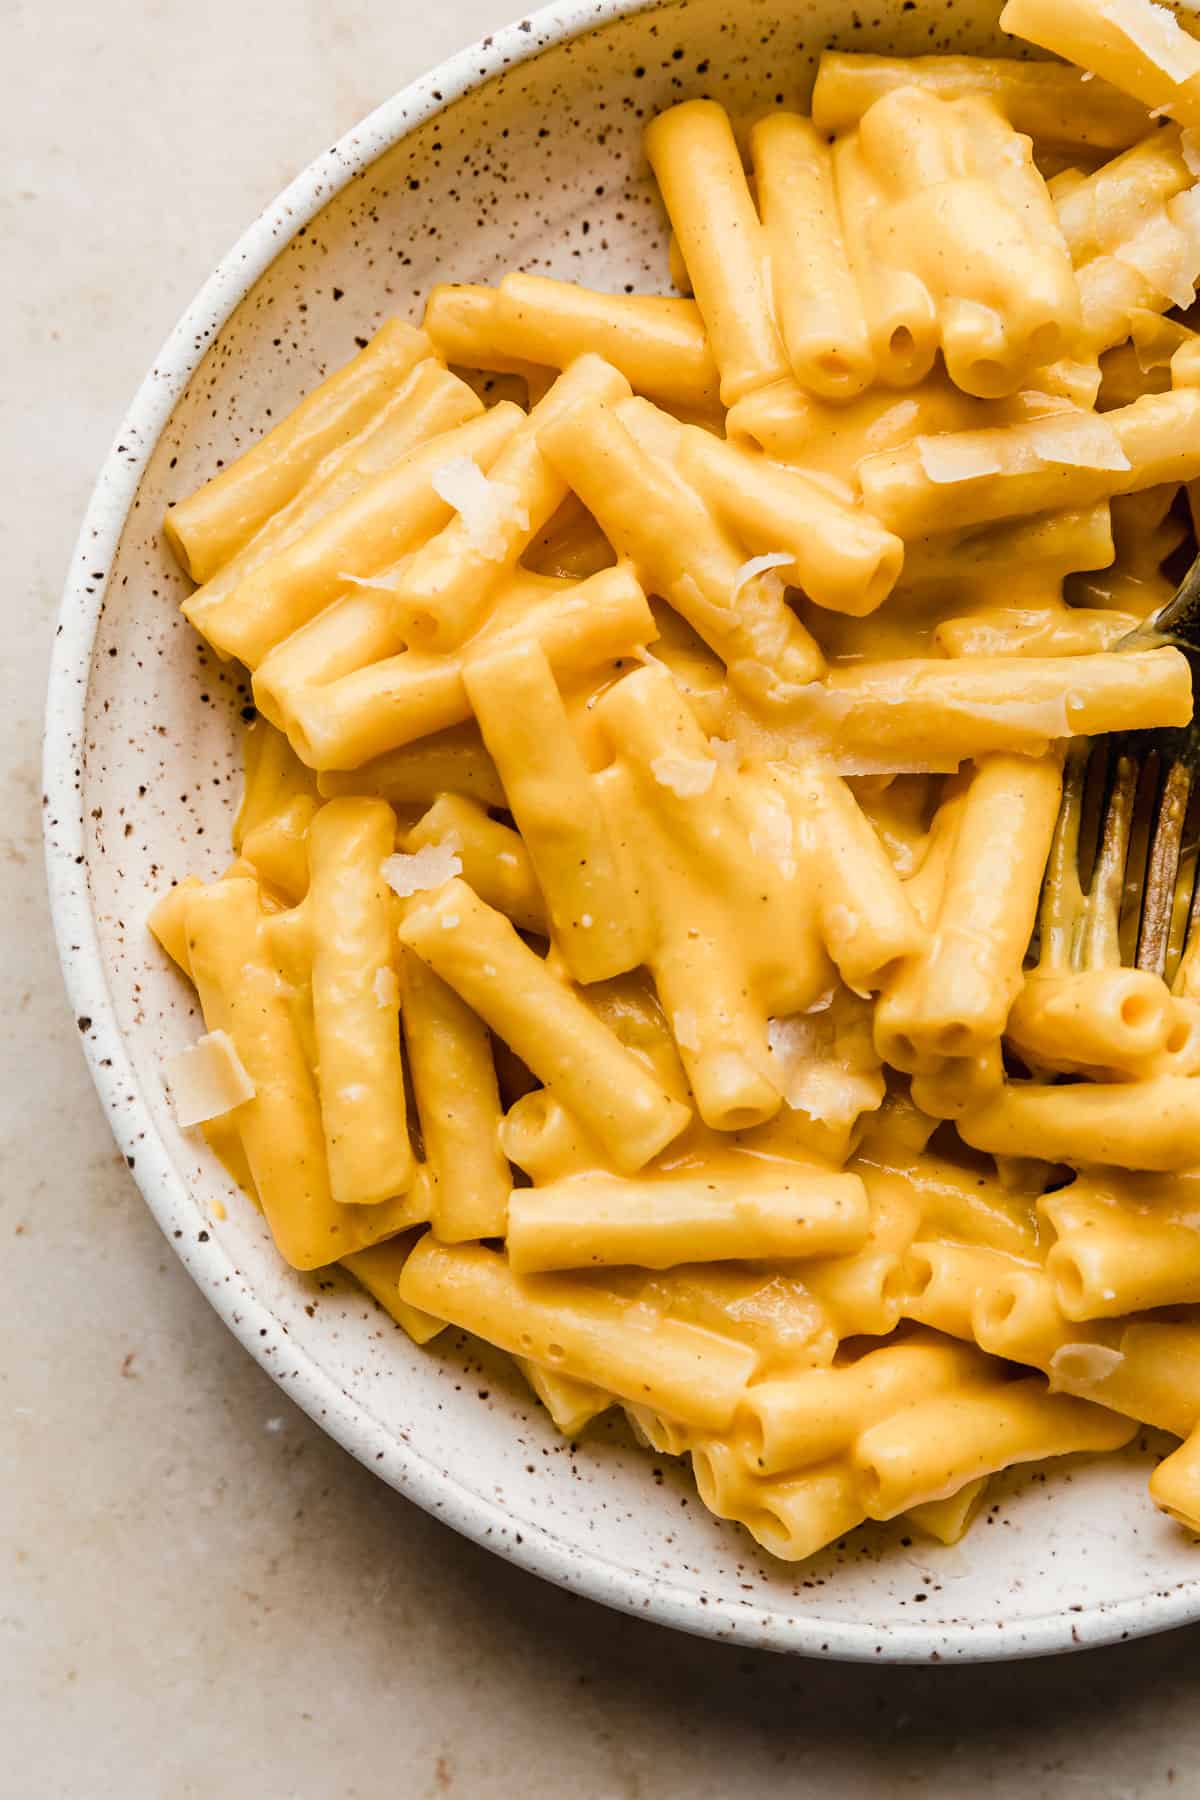 Creamy Roasted Butternut Squash Pasta sauce over ziti noodles in a white bowl.